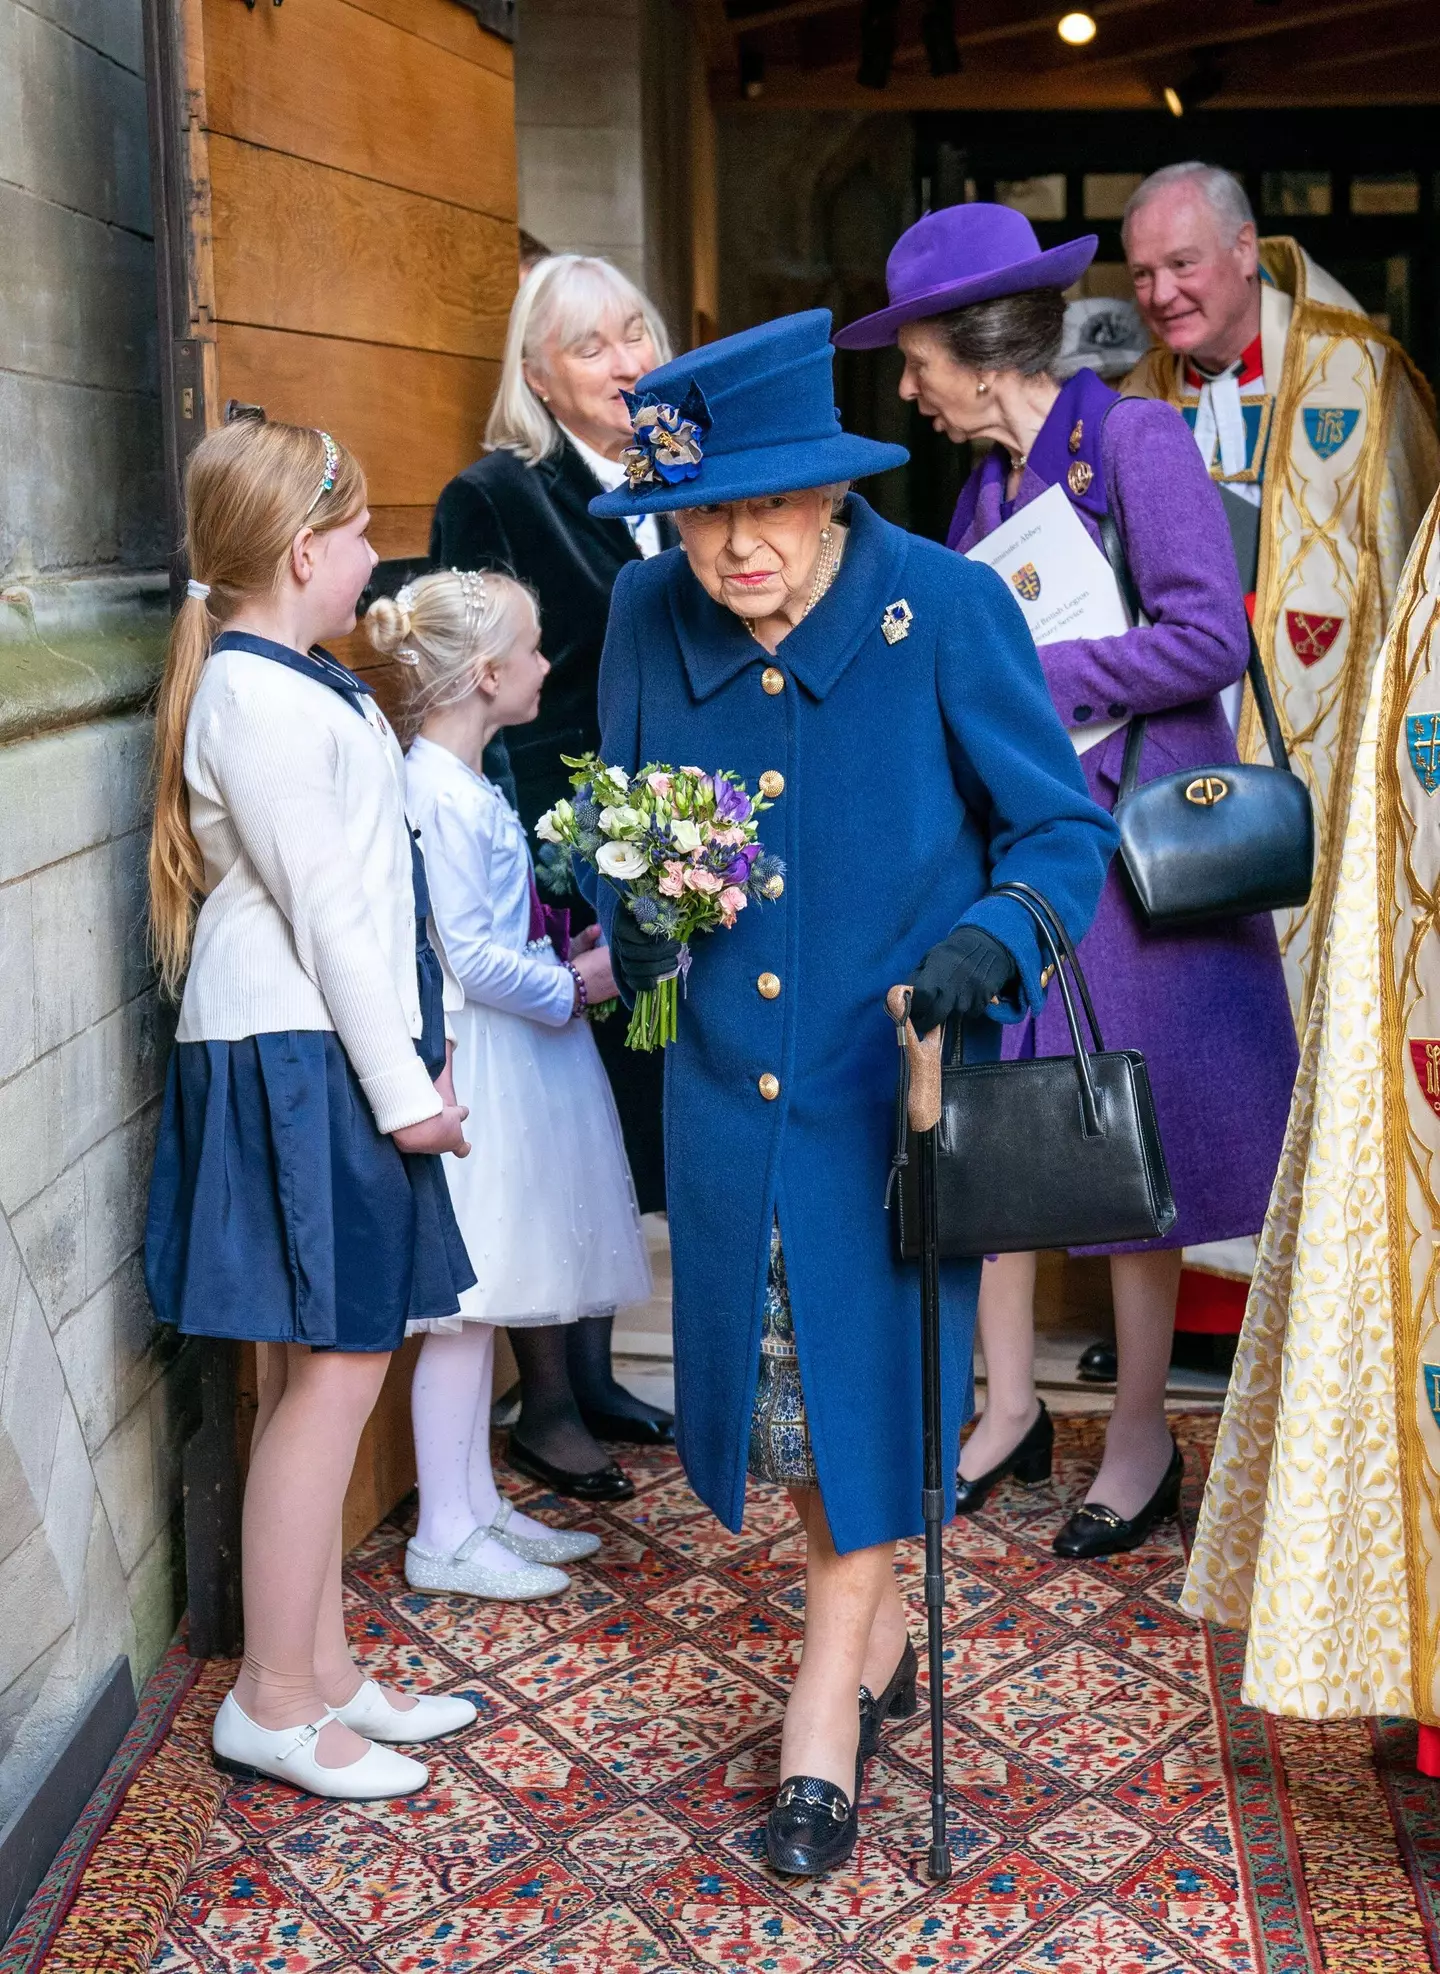 The Queen was seen using a walking stick (